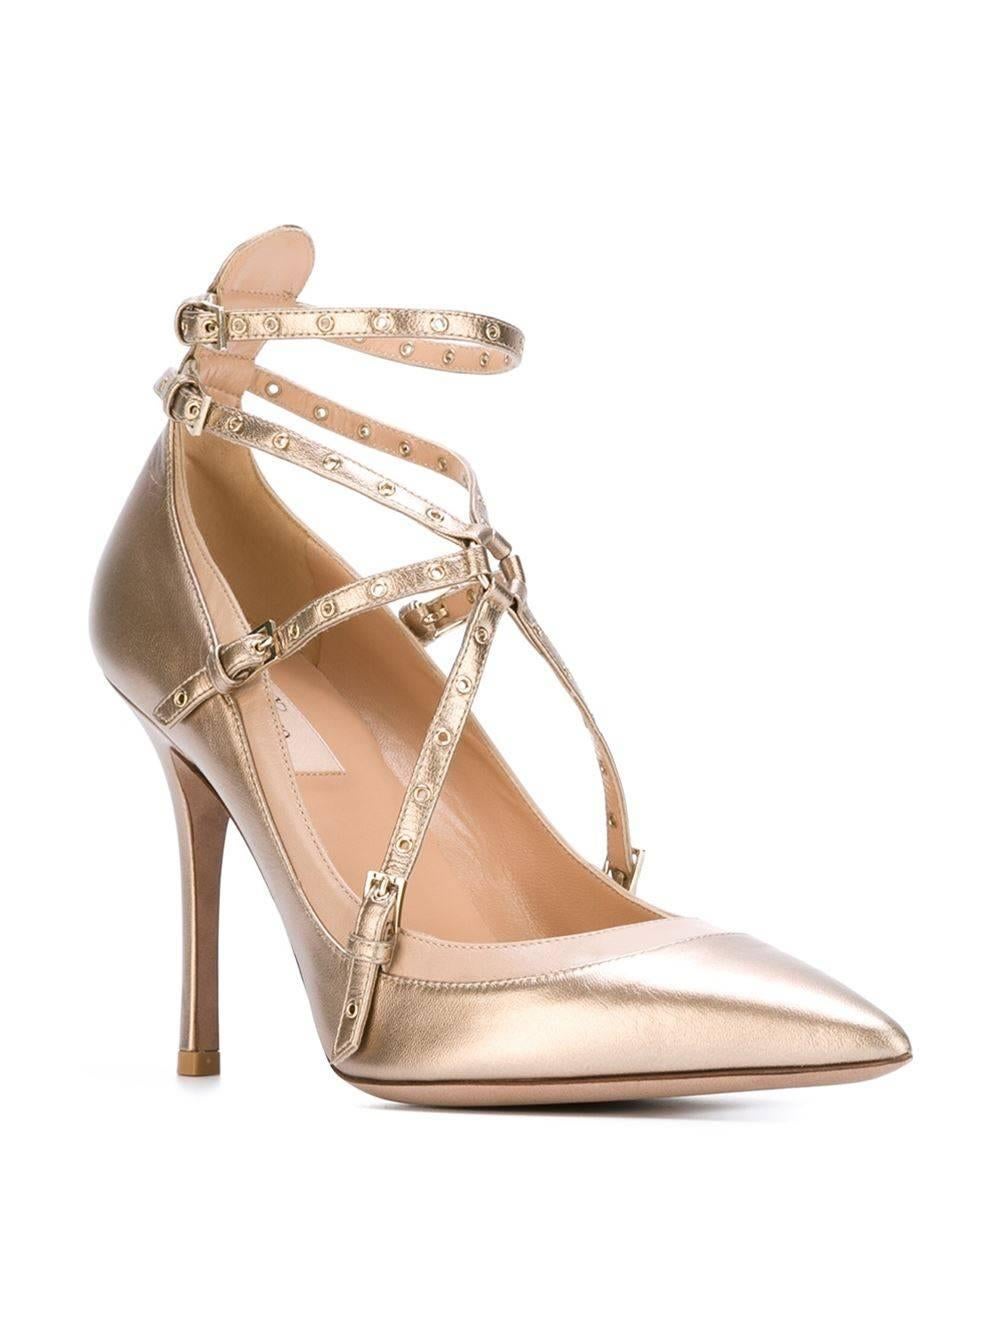 Valentino New Gold Bronze Leather Strappy Cut Out Heels Sandals in Box  1